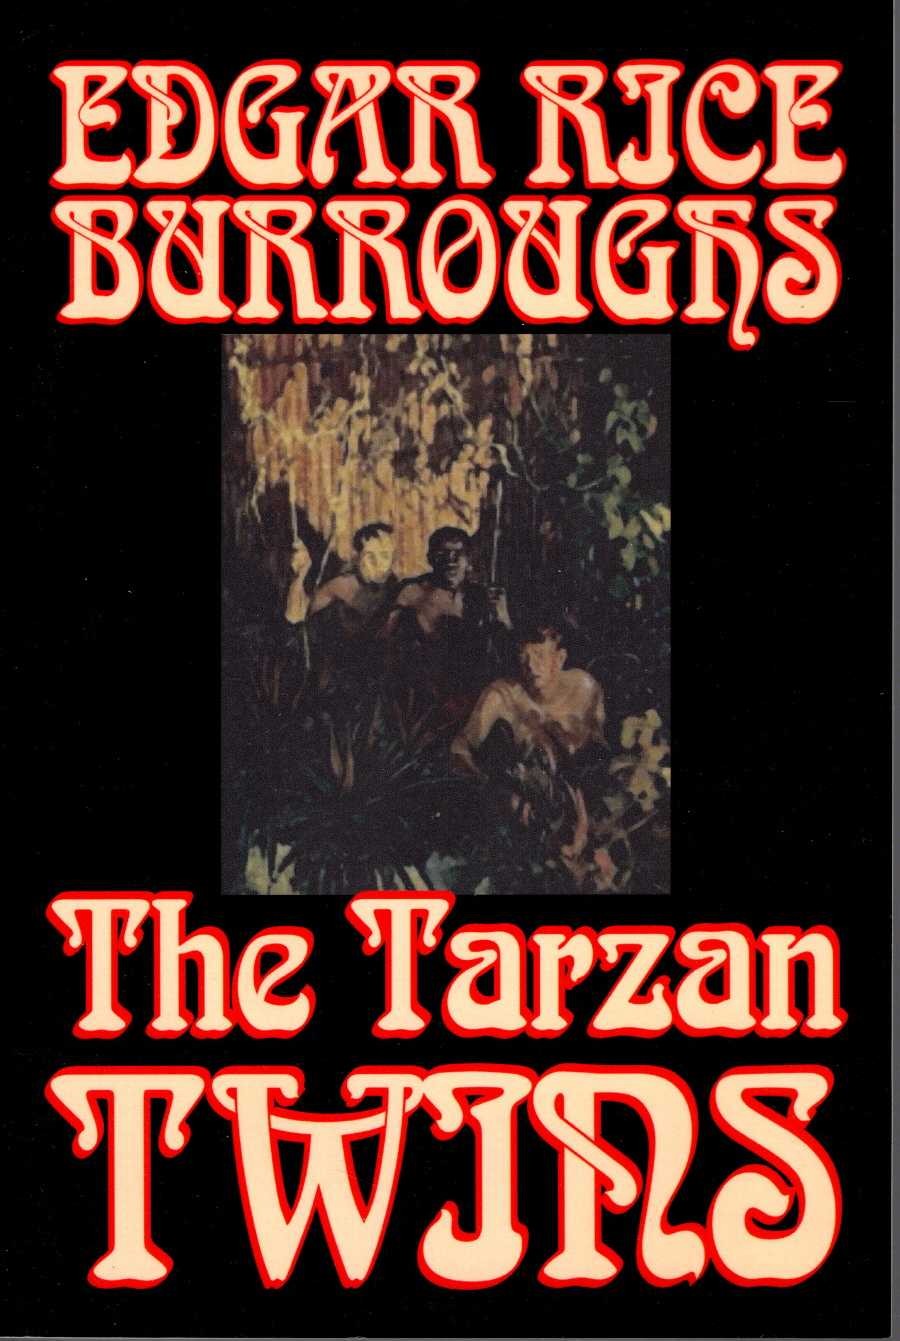 Edgar Rice Burroughs  THE TARZAN TWINS front book cover image